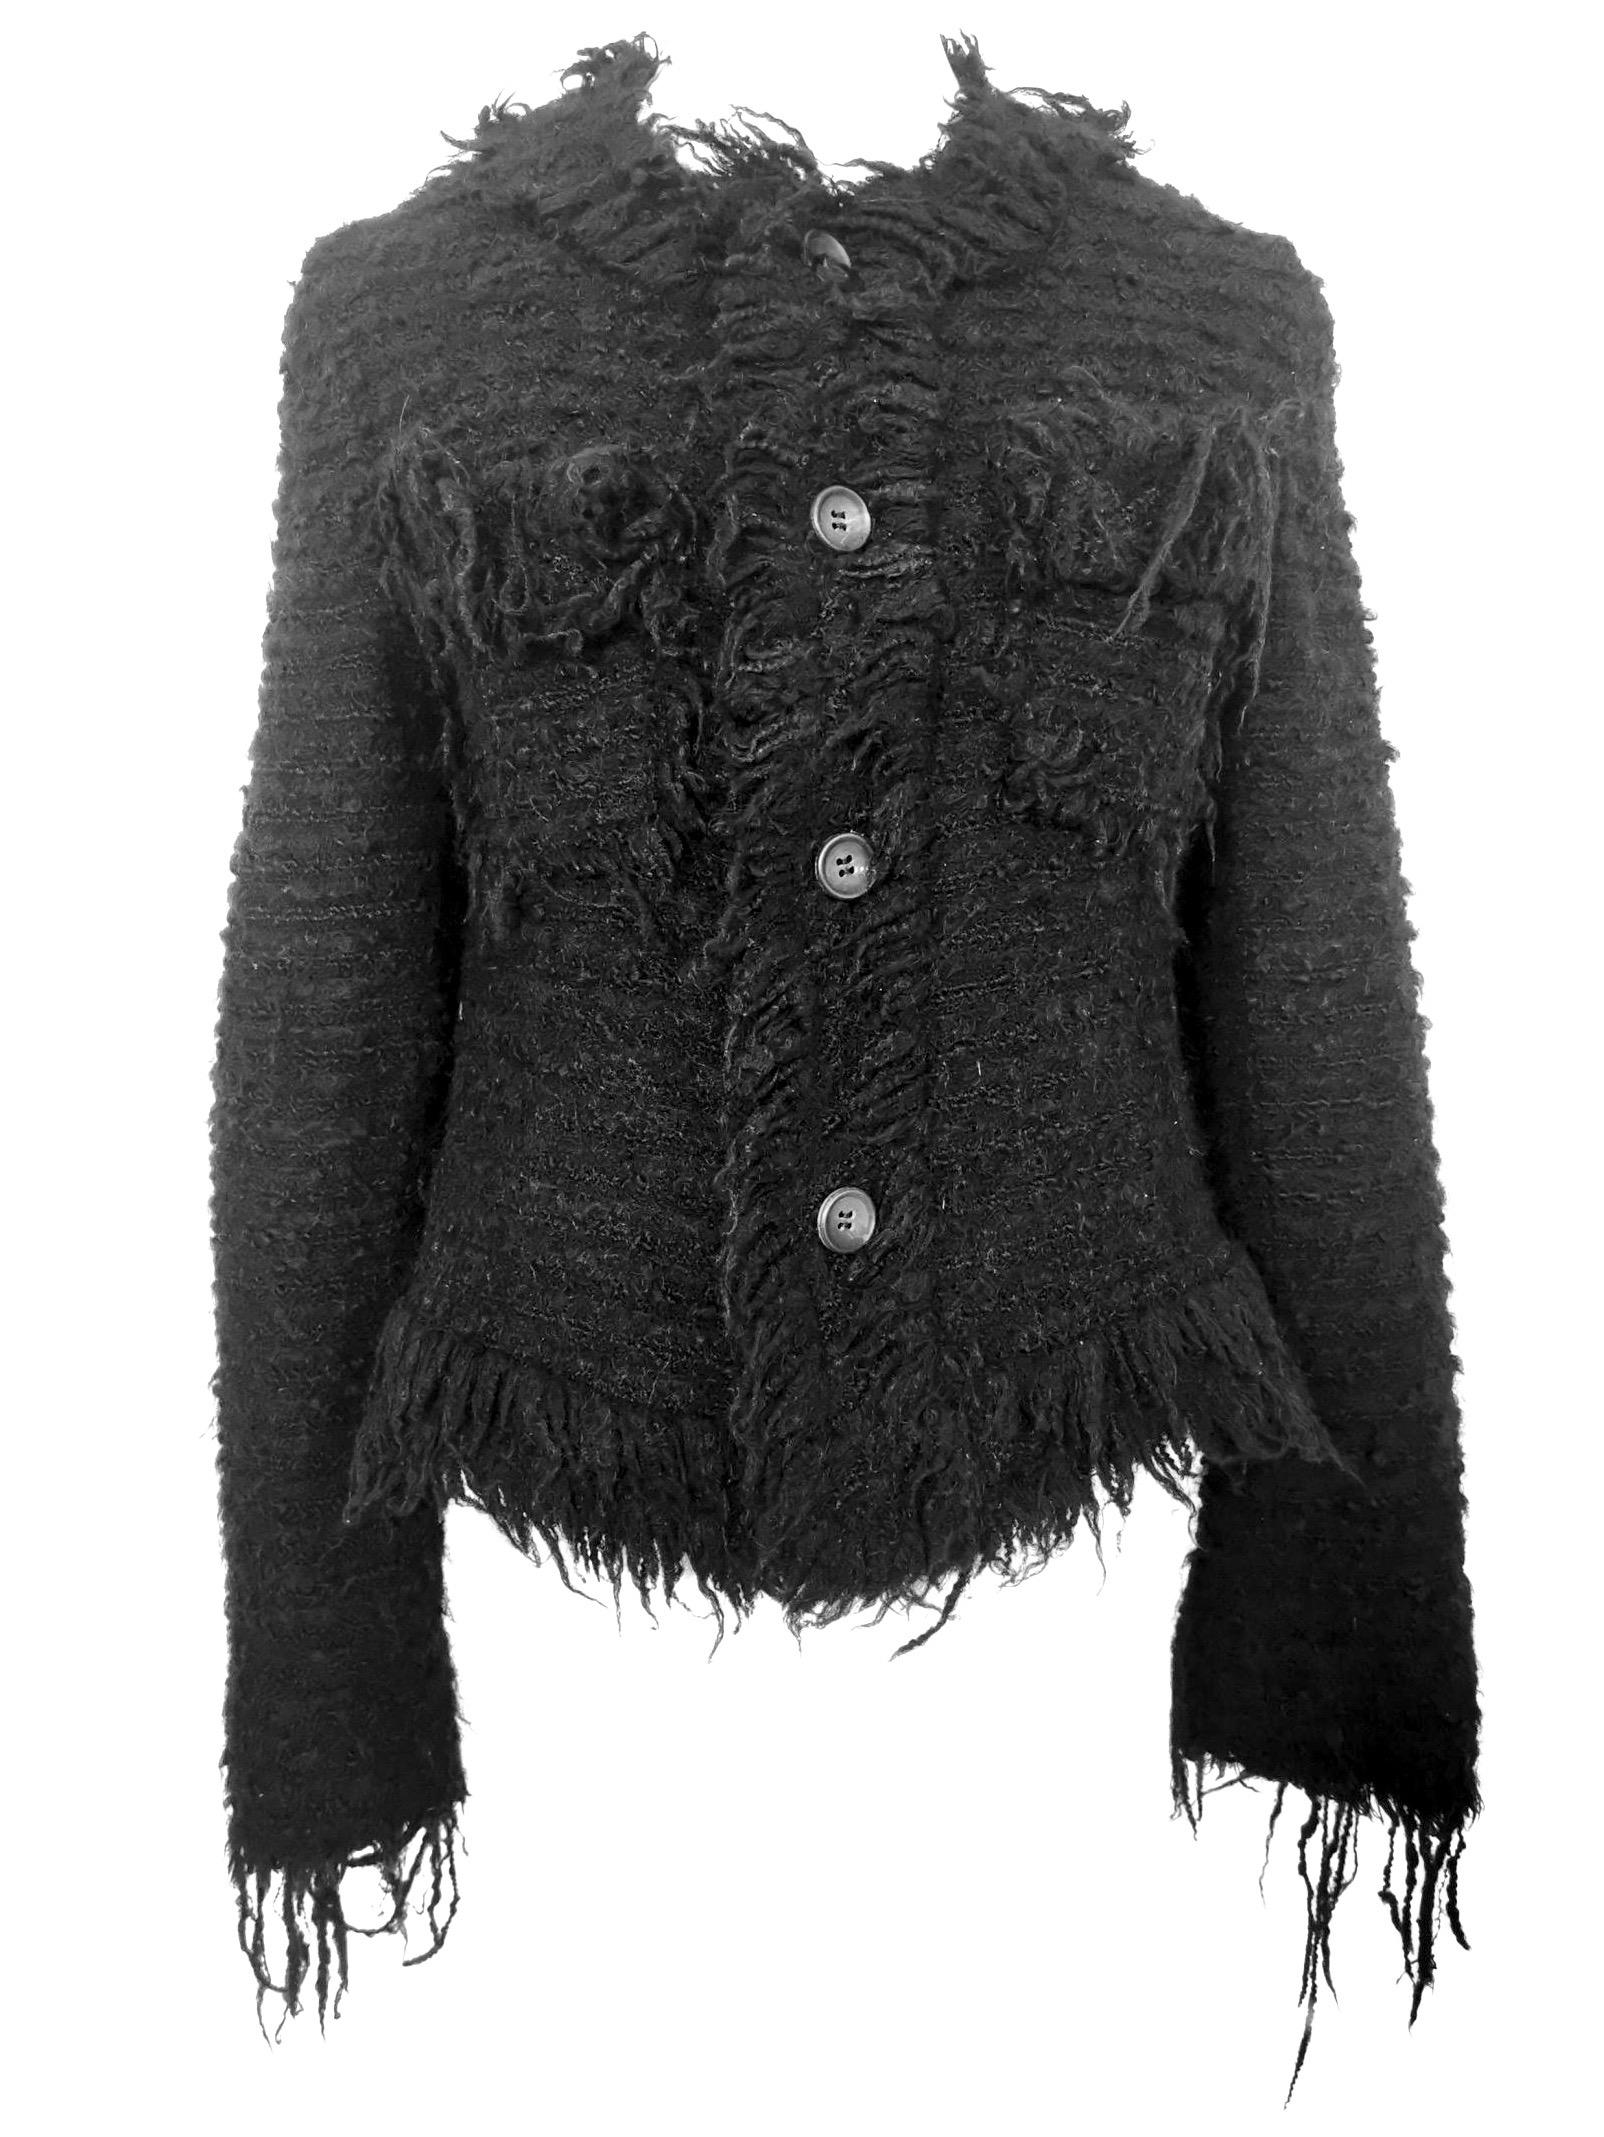 Black Comme des Garcons Junya Watanabe Cropped Chanel Style Fringed Jacket AD 2003